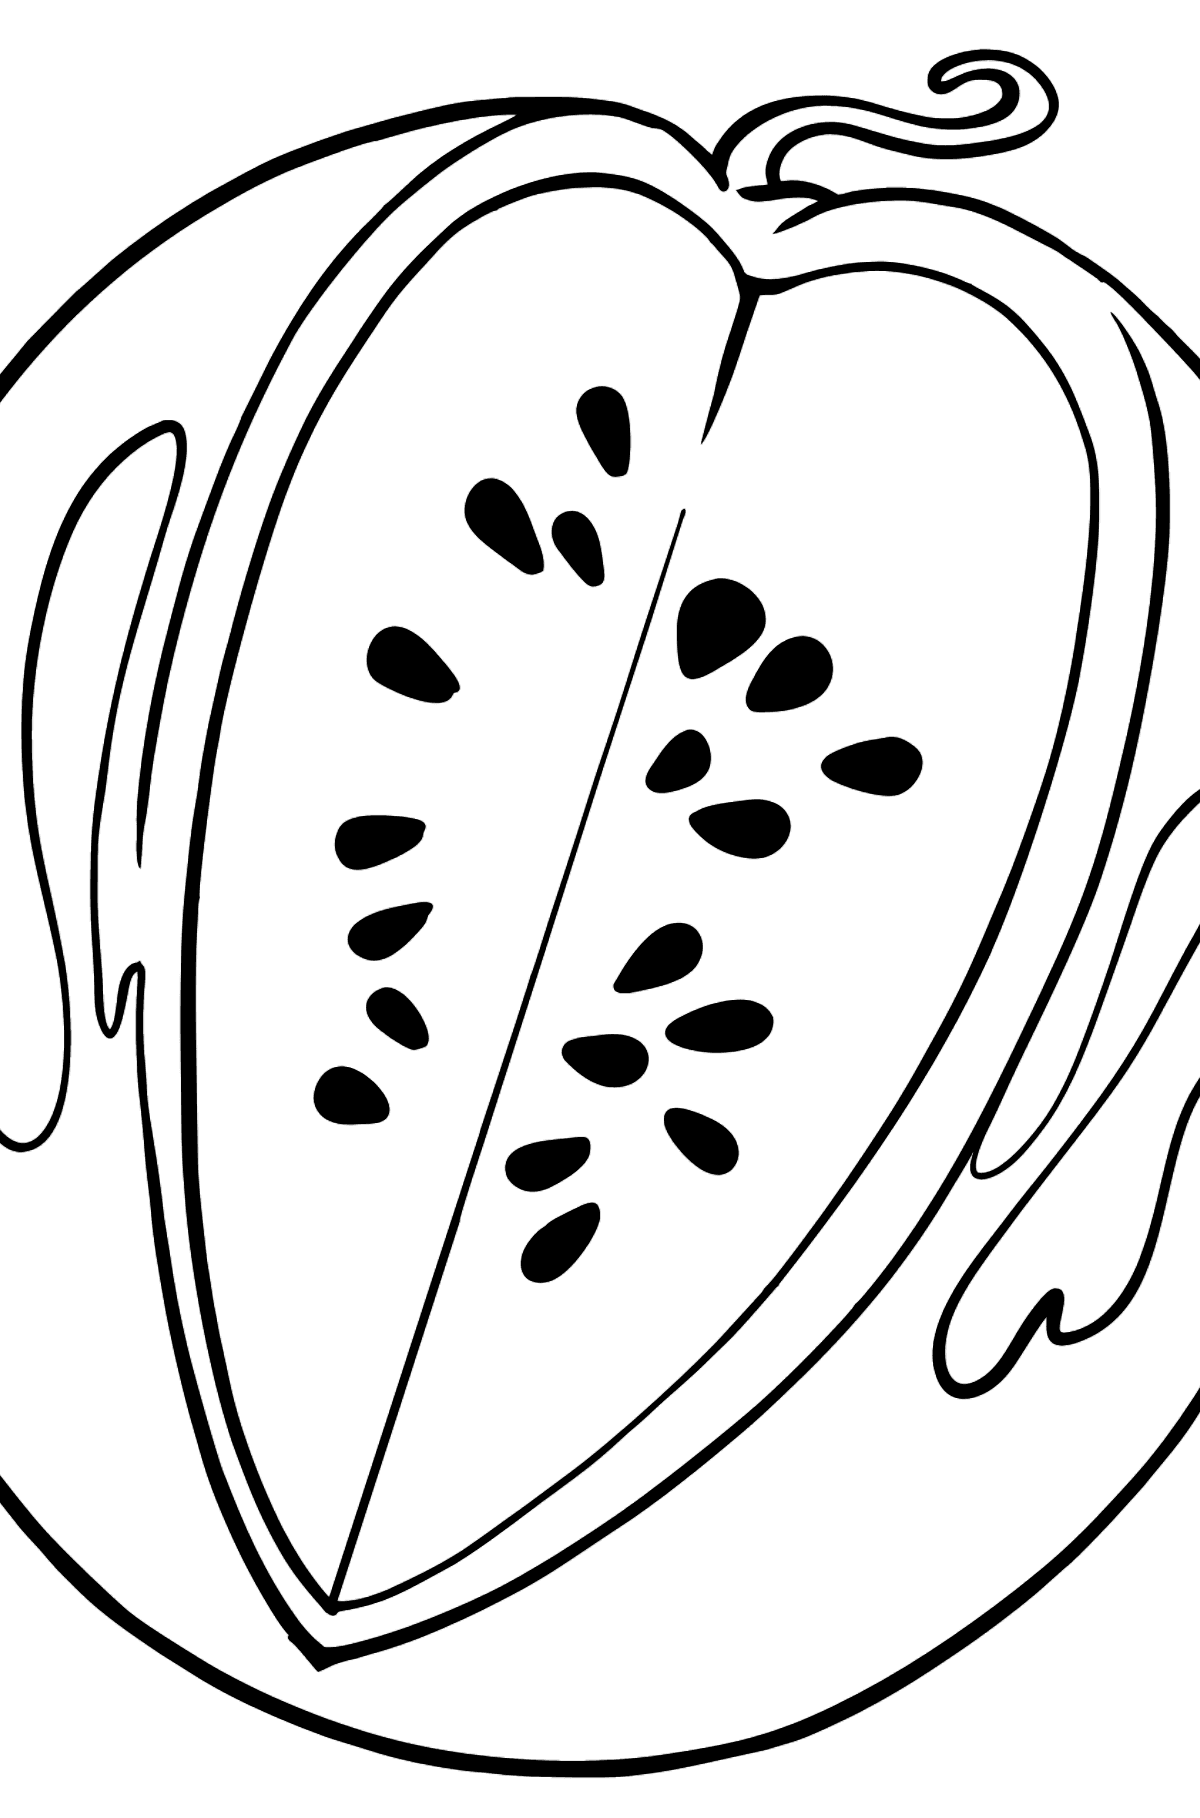 Watermelon coloring page - Coloring Pages for Kids